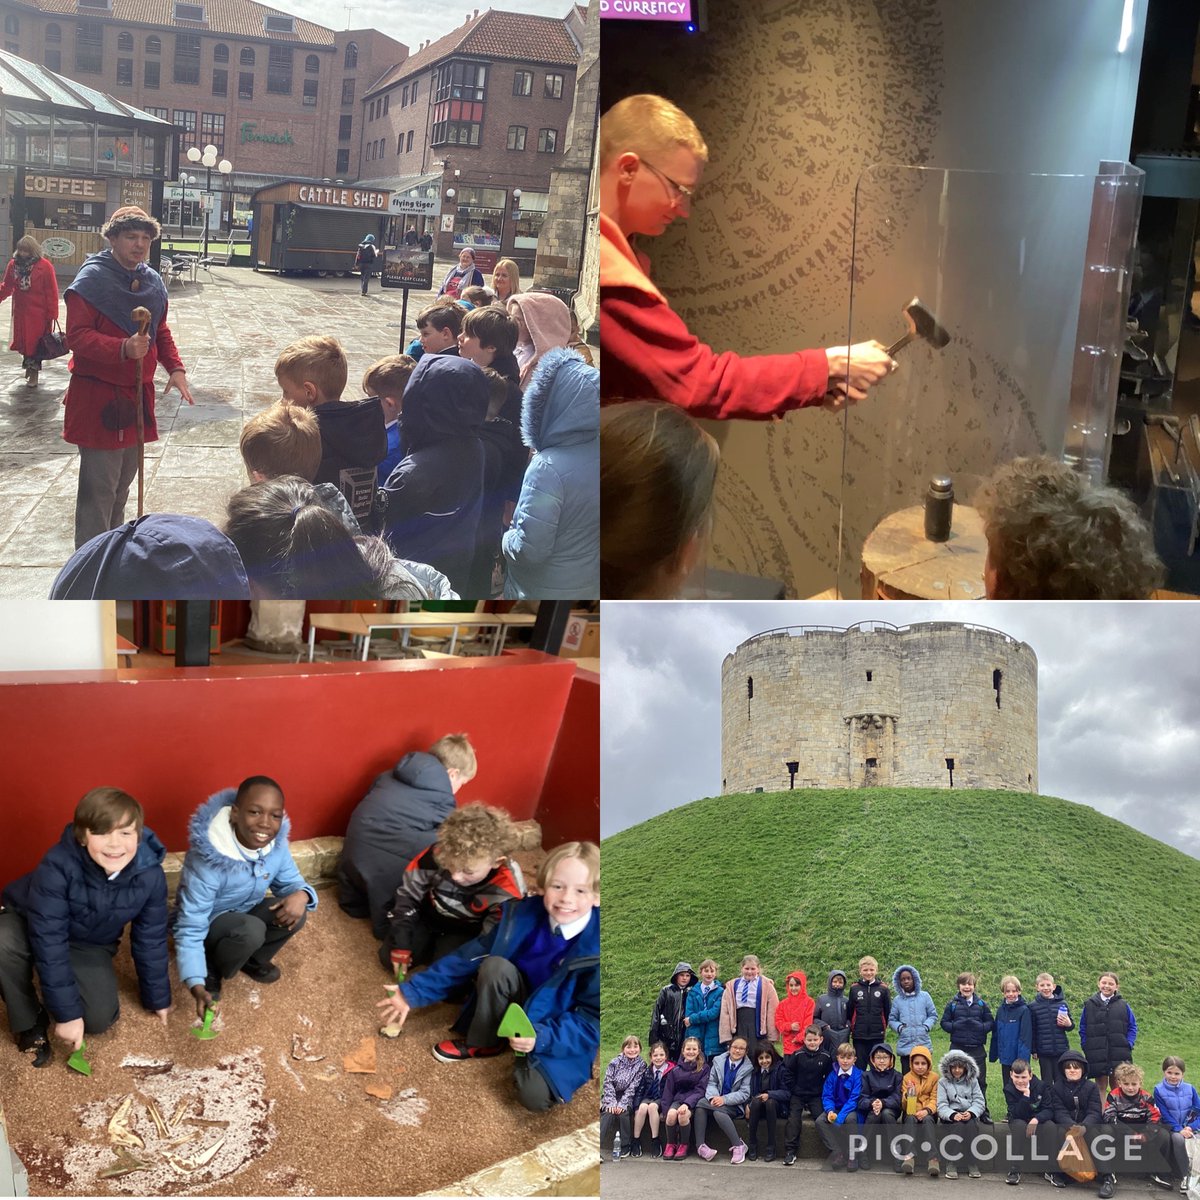 This week, Year 4 visited the Jorvik Viking Centre and the Dig Site to explore more about the Vikings. ⛏⚠️ All the children had a great day and represented school wonderfully! #watergrovetrust #providingmore